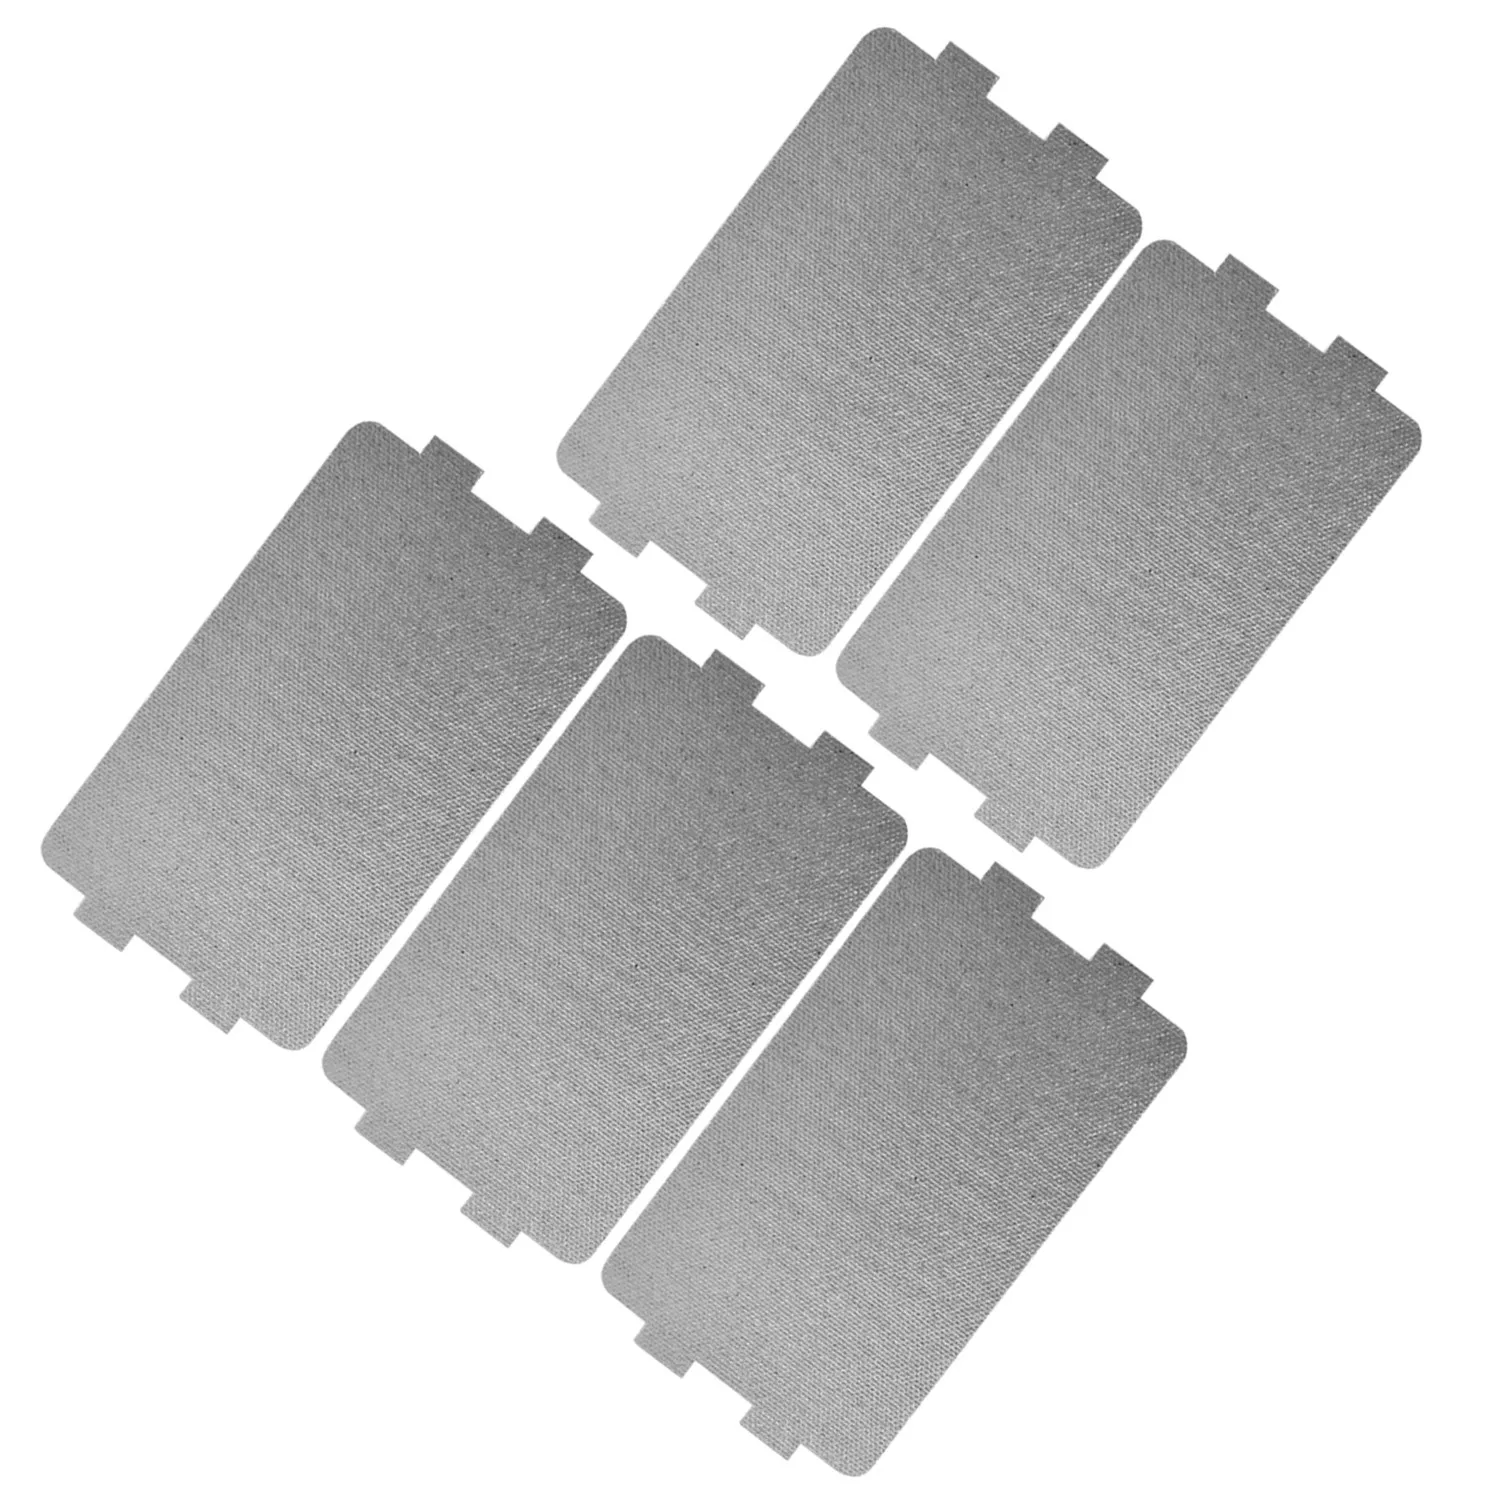 5pcs Universal Microwave Oven Mica Sheet Thicker Spare Parts For Microwave Ovens Mica Microwave Waveguide Cover Sheet Plates